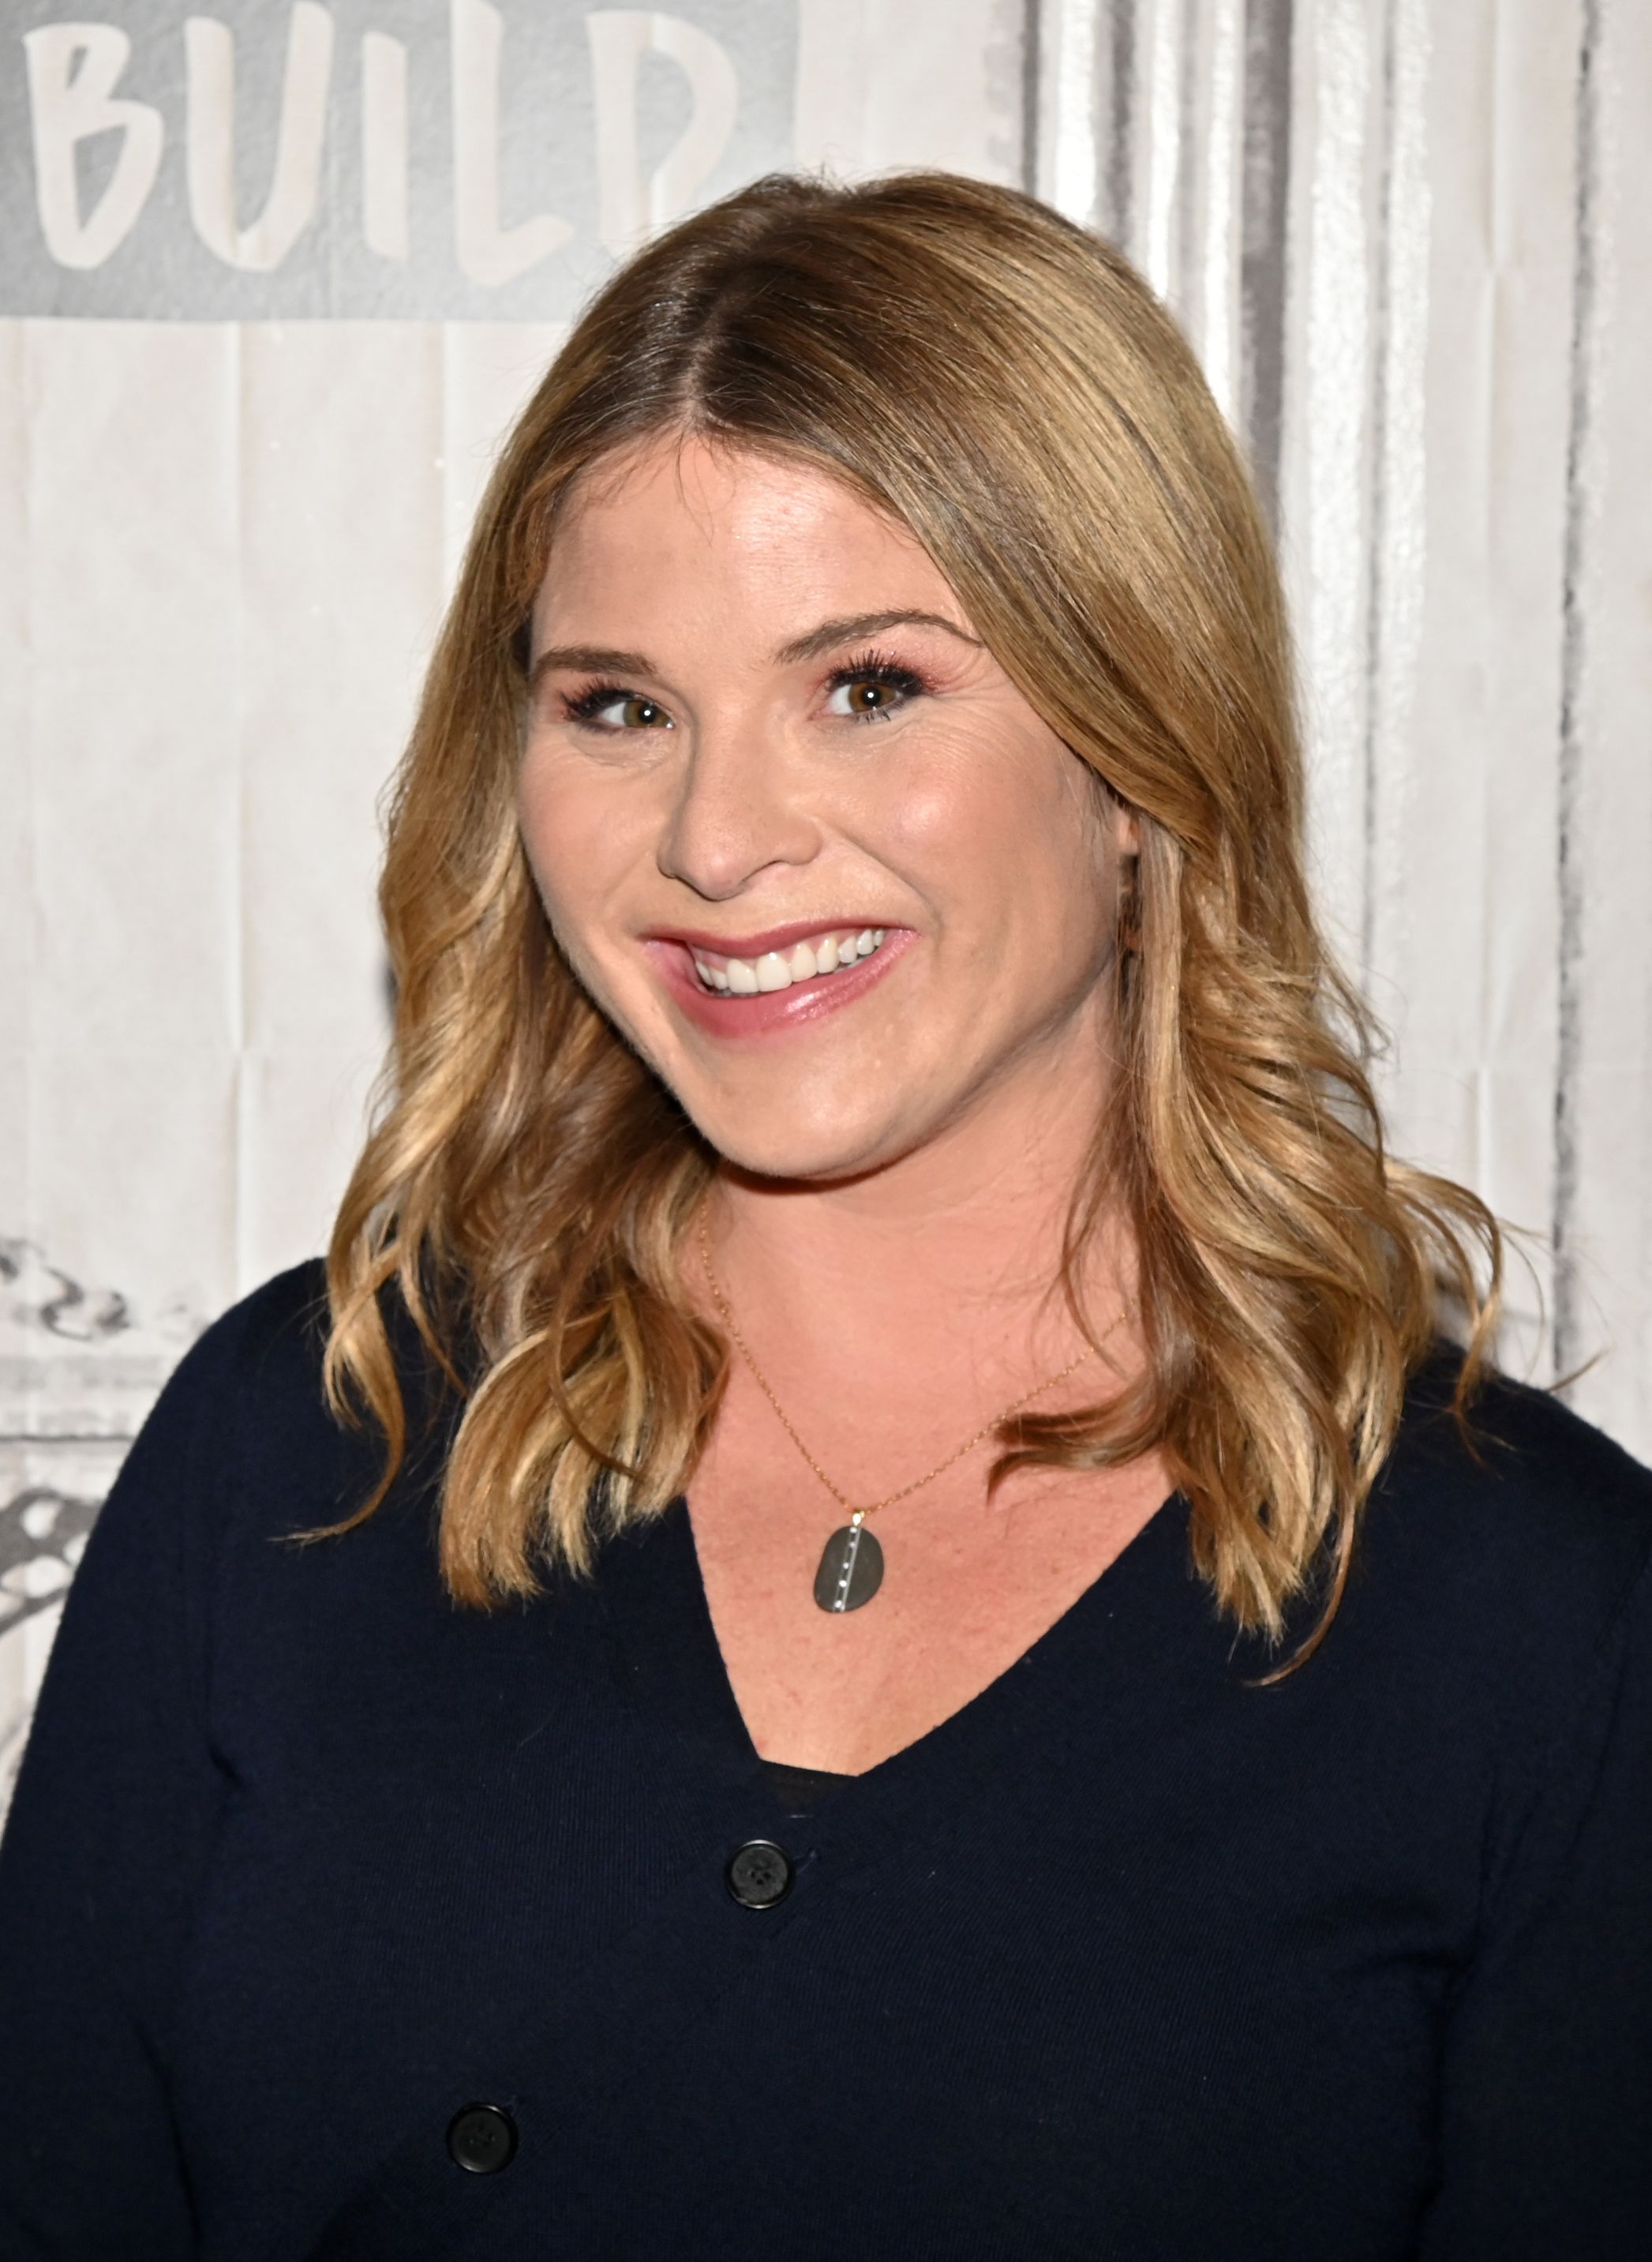 Jenna Bush Hager visits Build at Build Studio on April 08, 2019 in New York City.| Photo: Getty Images